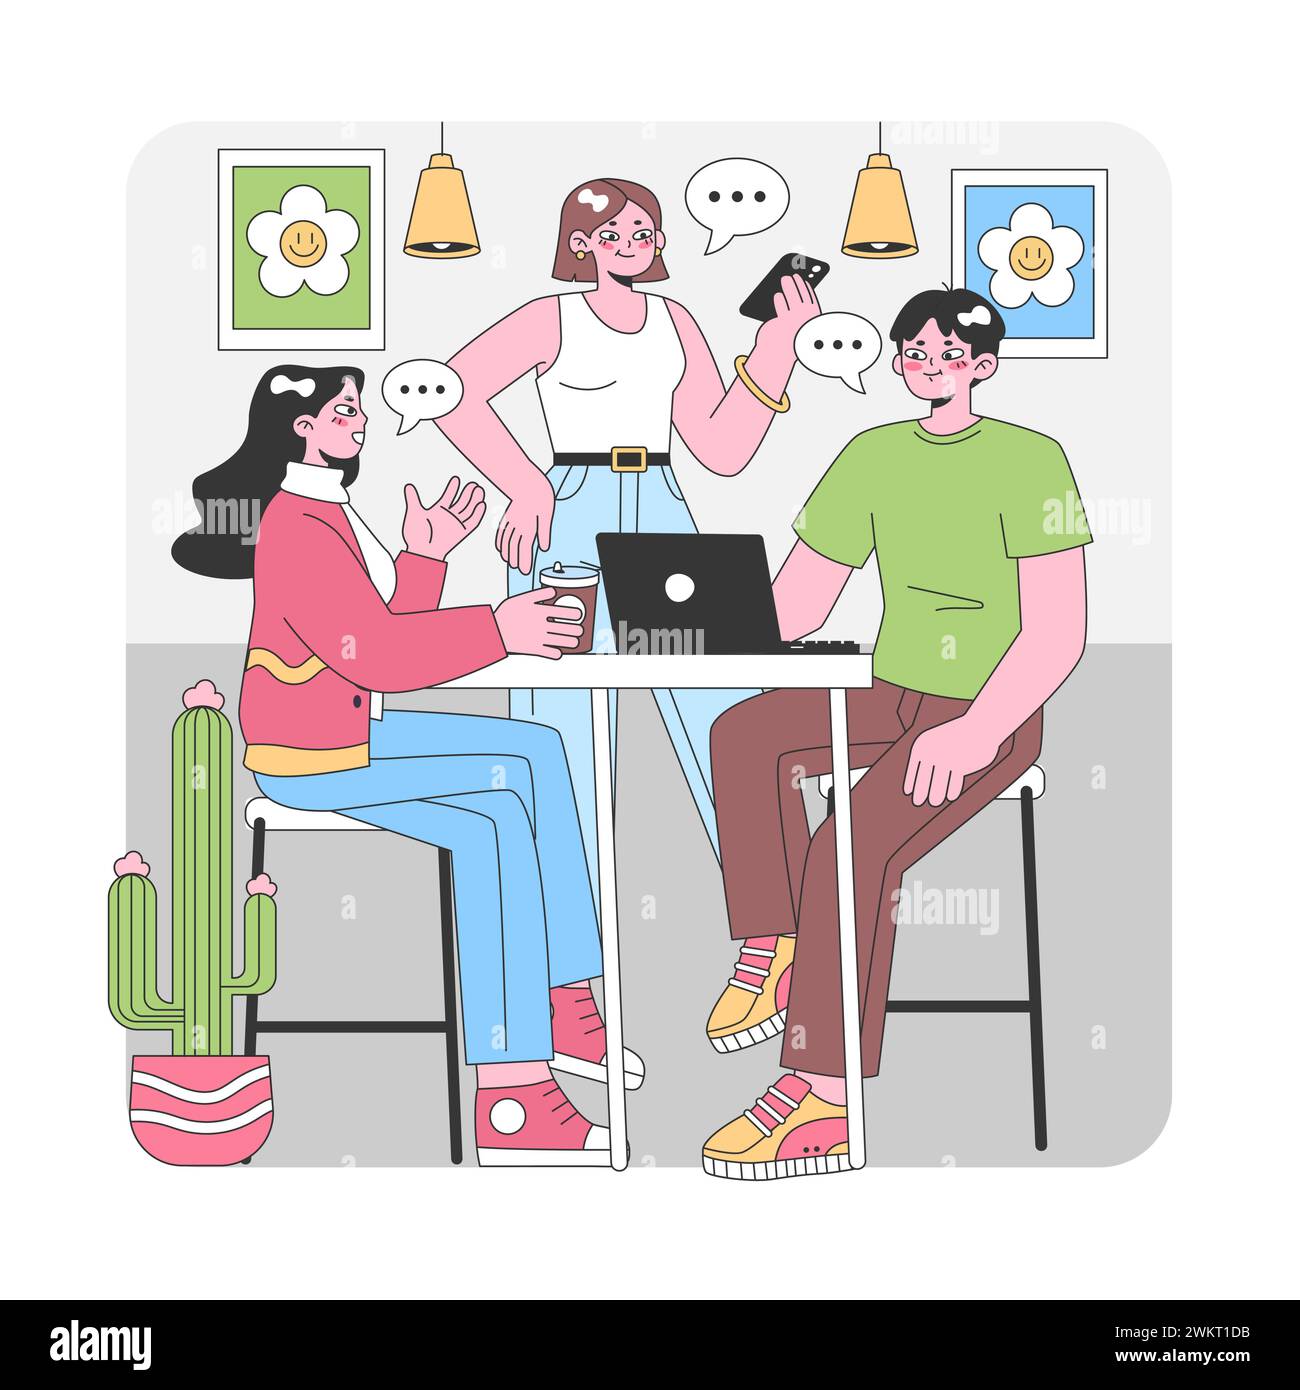 Friends catching up in a cozy cafe setting. Animated discussions, coffee sips, and shared laughter amid modern decor elements. Capturing candid moments. Flat vector illustration Stock Vector